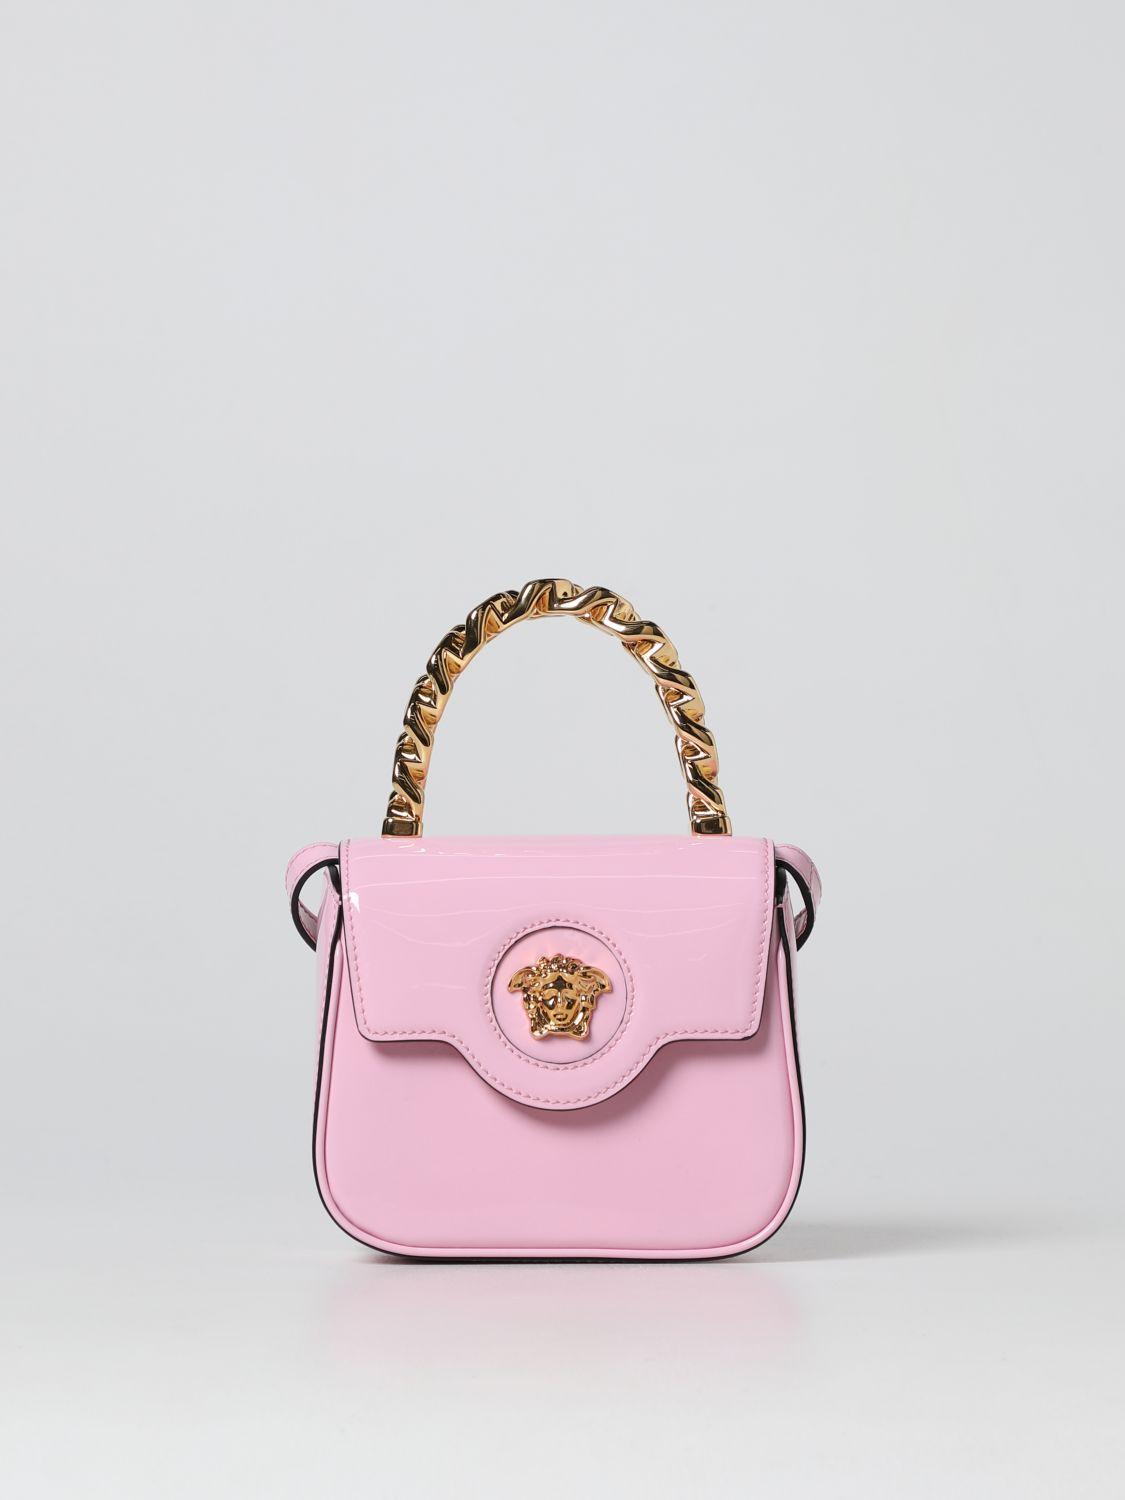 Versace Medusa Patent Leather Bag in Pink | Lyst